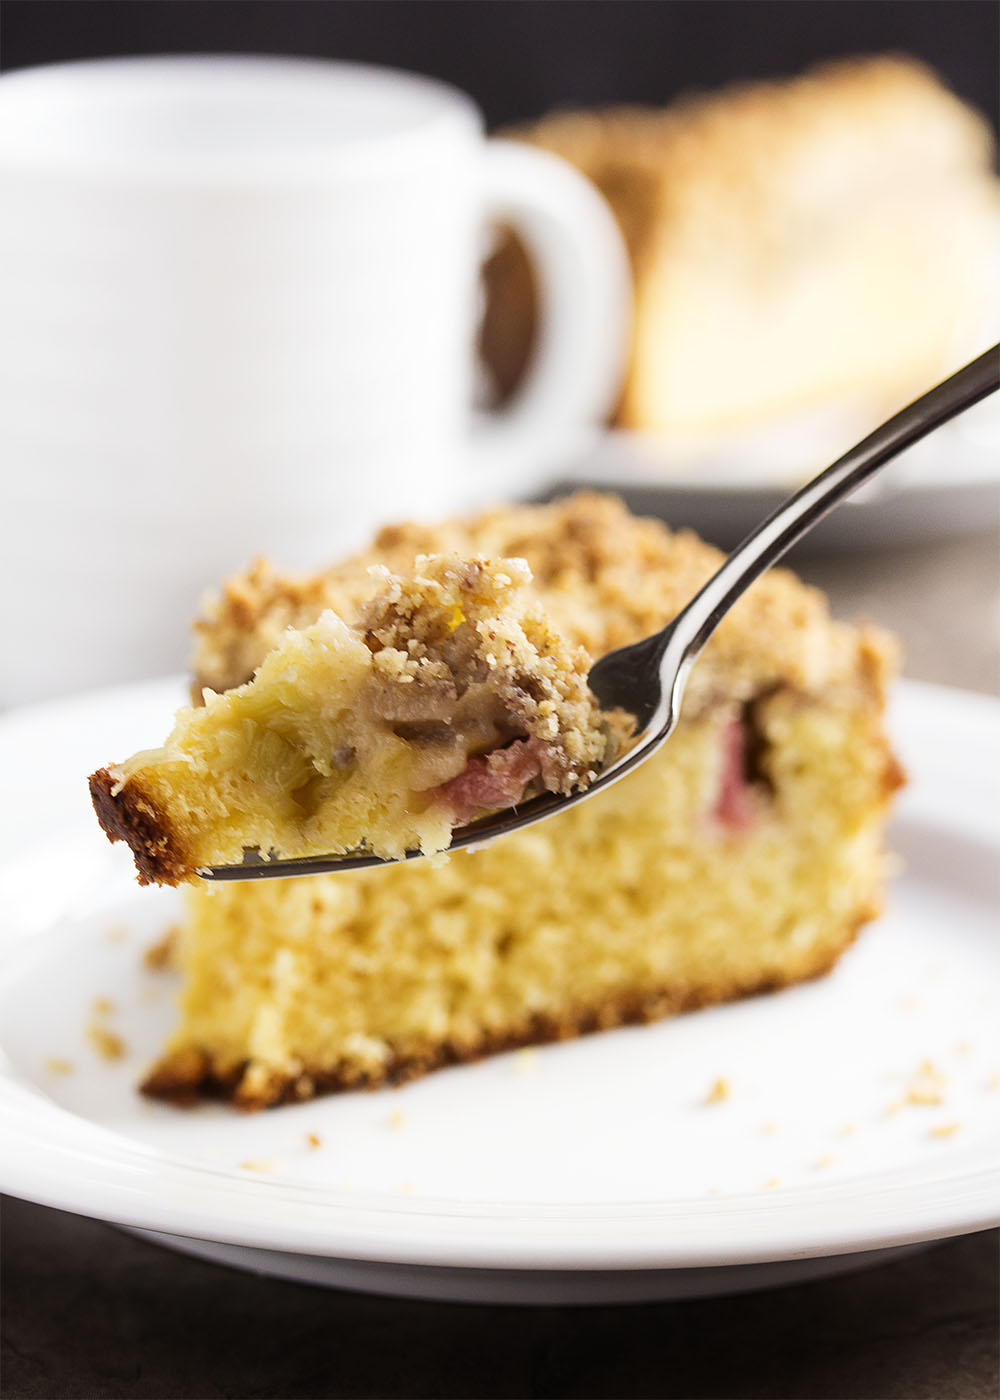 Rhubarb Coffee Cake with Crumb Topping - Spring is here with this rhubarb coffee cake, which has a tart layer of rhubarb sandwiched between soft cake on the bottom and crumb topping above. A little sweet, a little tart, and all yummy! | justalittlebitofbacon.com